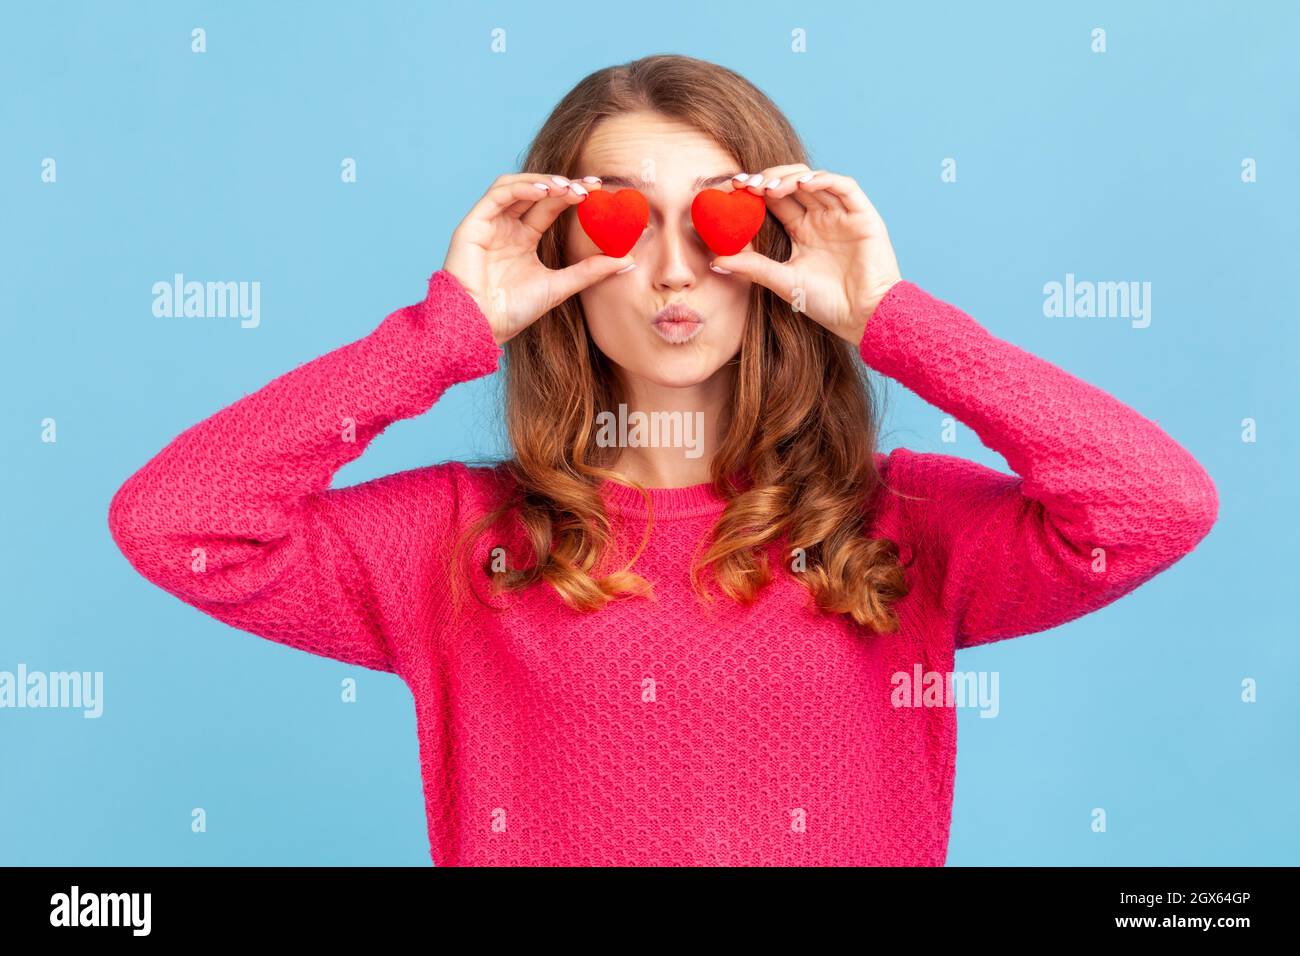 Portrait of romantic woman wearing pink pullover, covering eyes with little toy hearts as if looking with love, affection, sending air kisses. Indoor studio shot isolated on blue background. Stock Photo